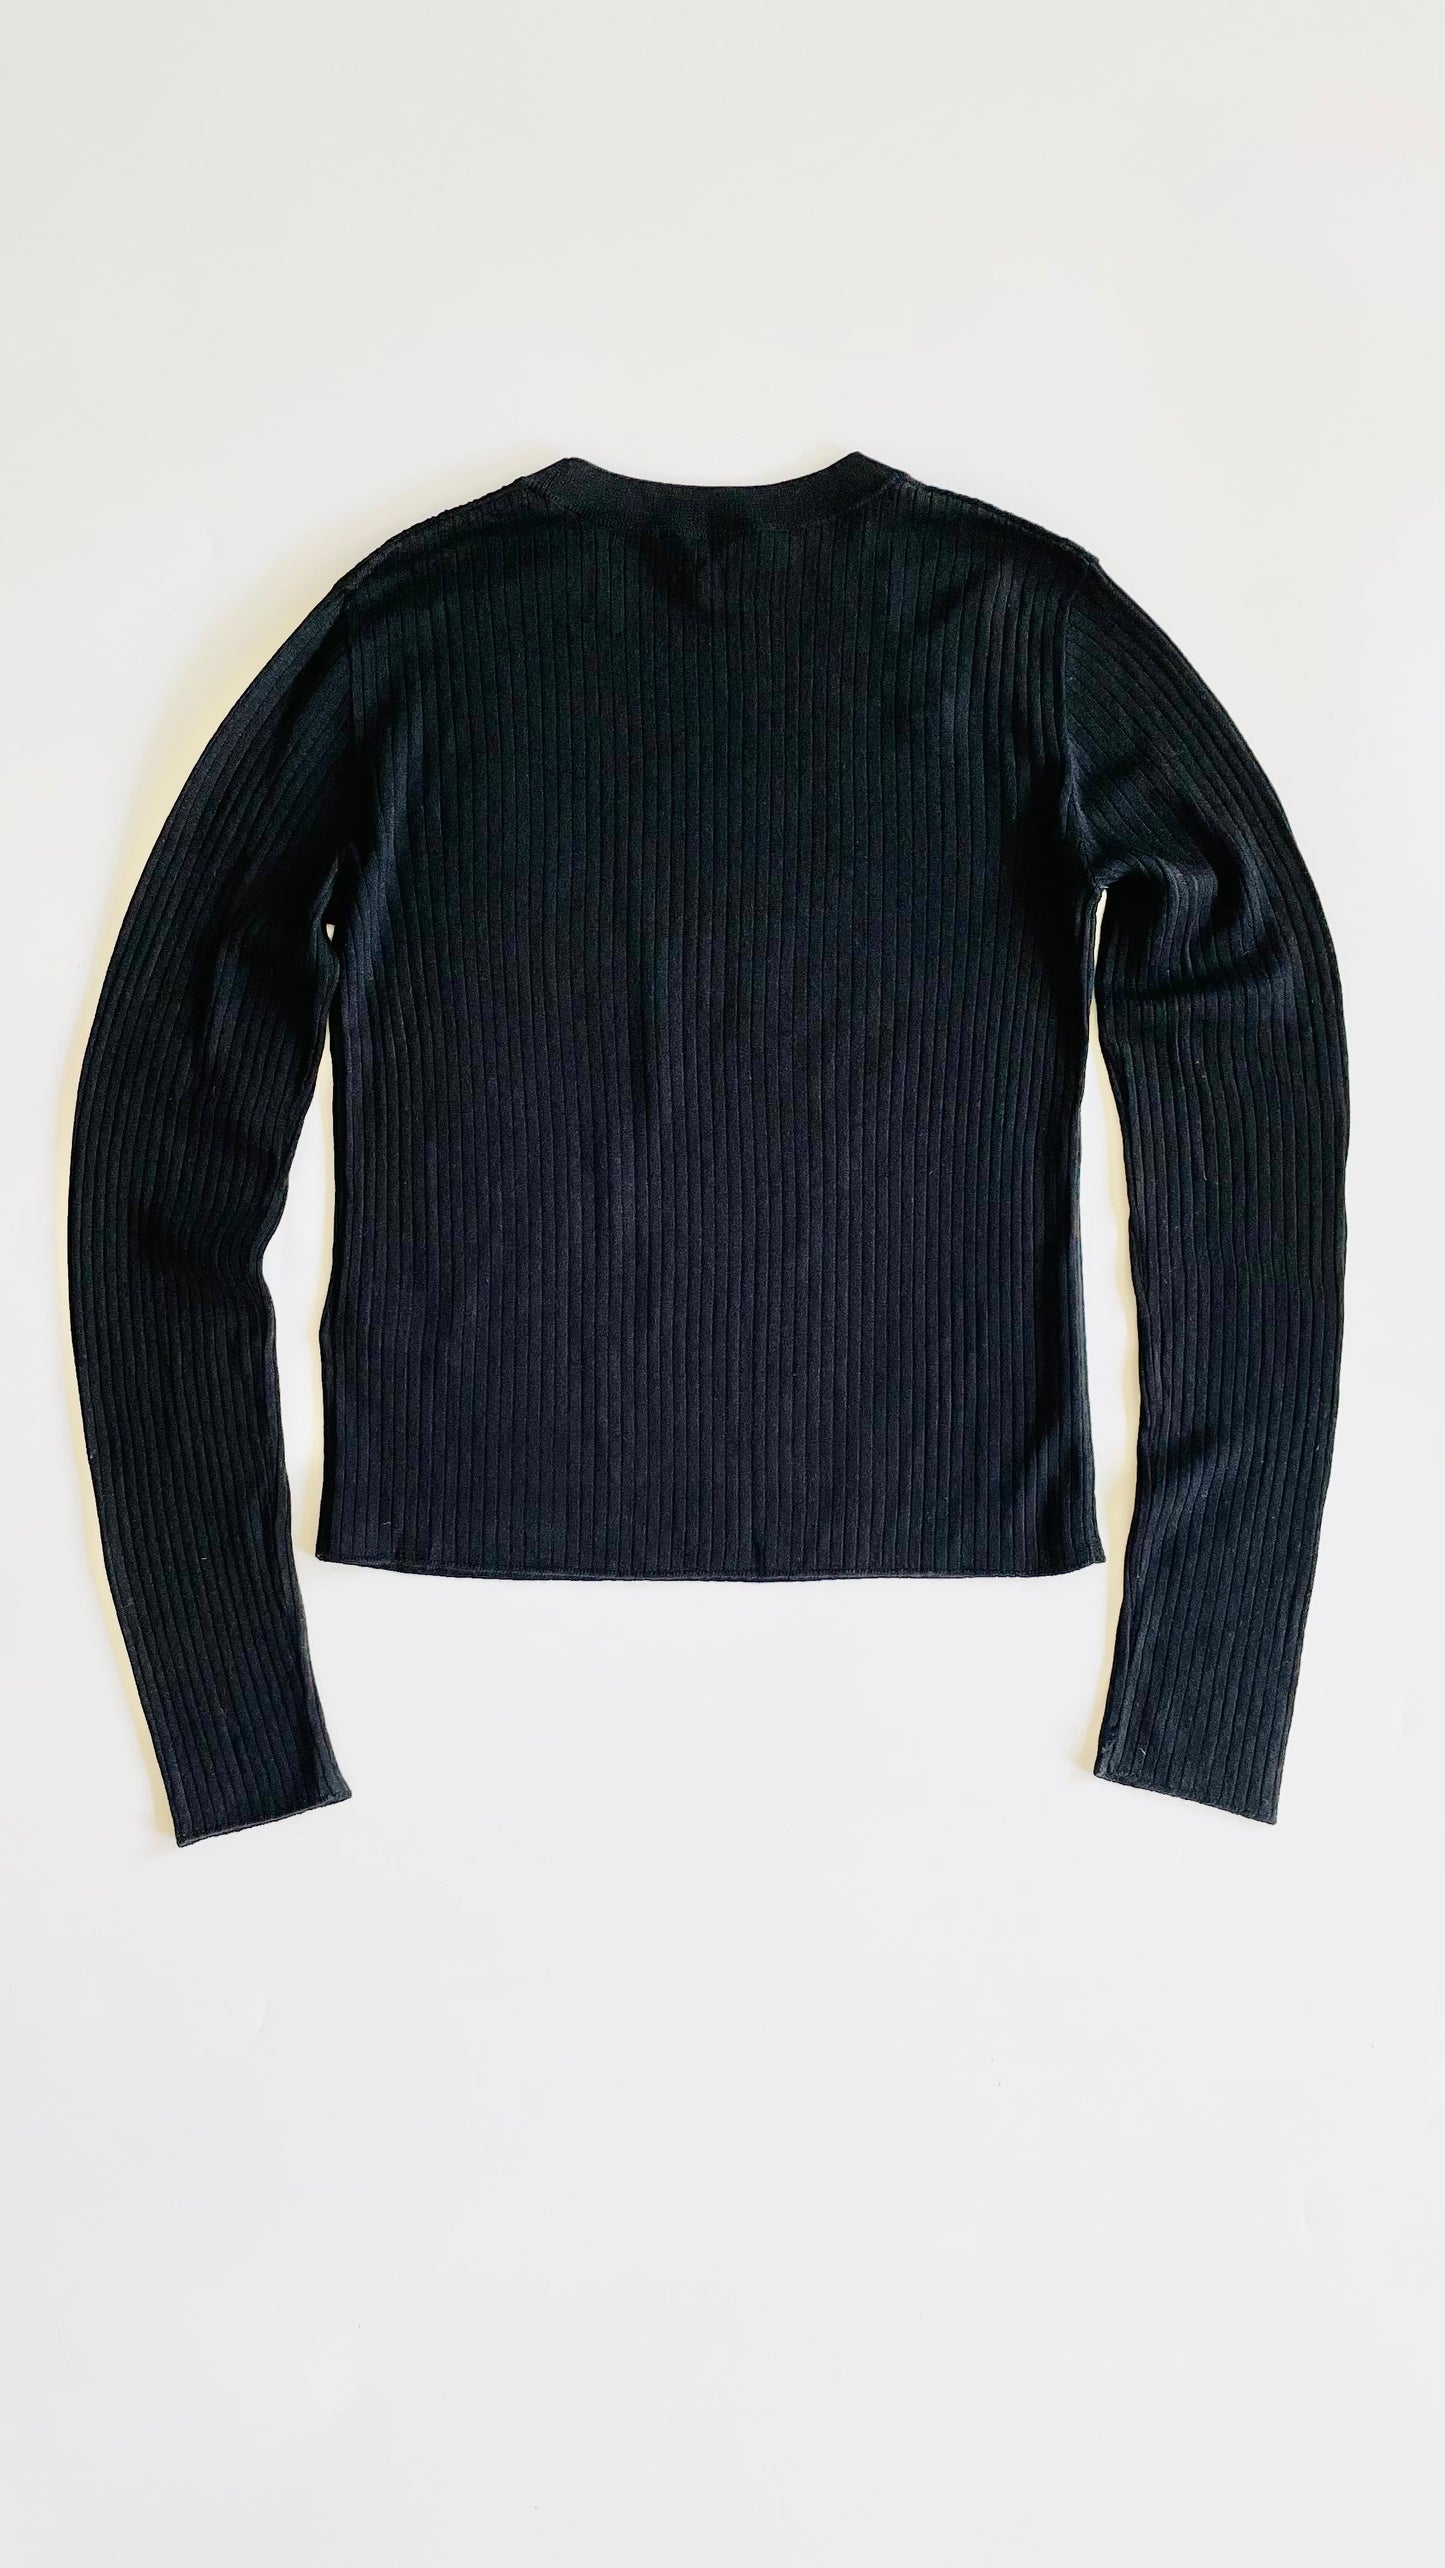 Pre-Loved & Other Stories black ribbed knit top NWOT - Size M